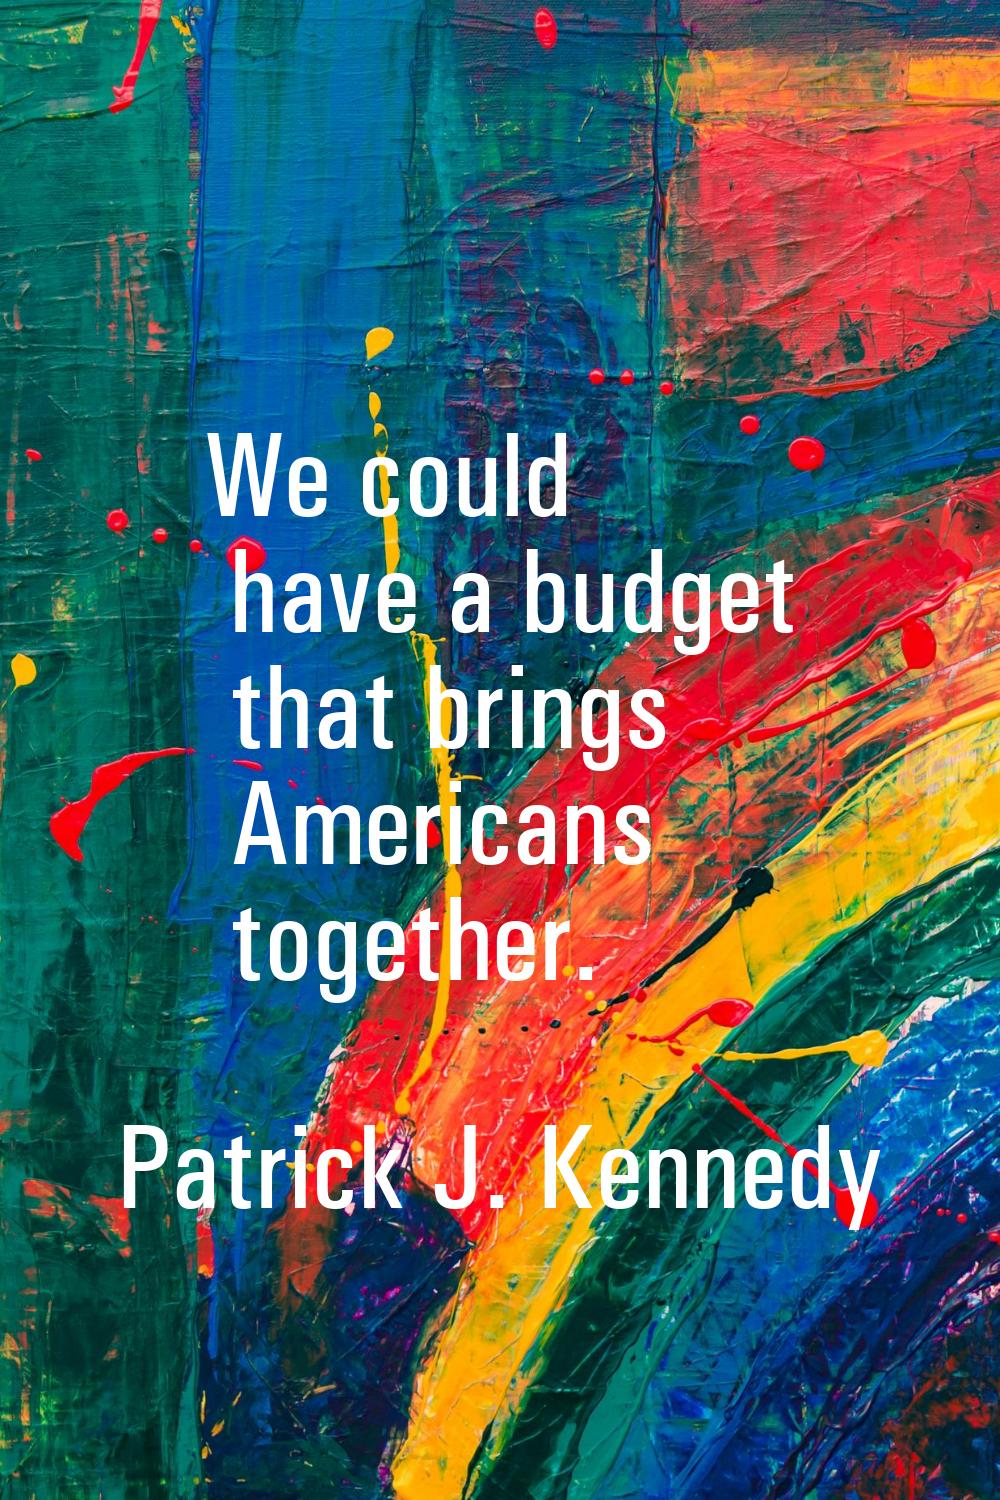 We could have a budget that brings Americans together.